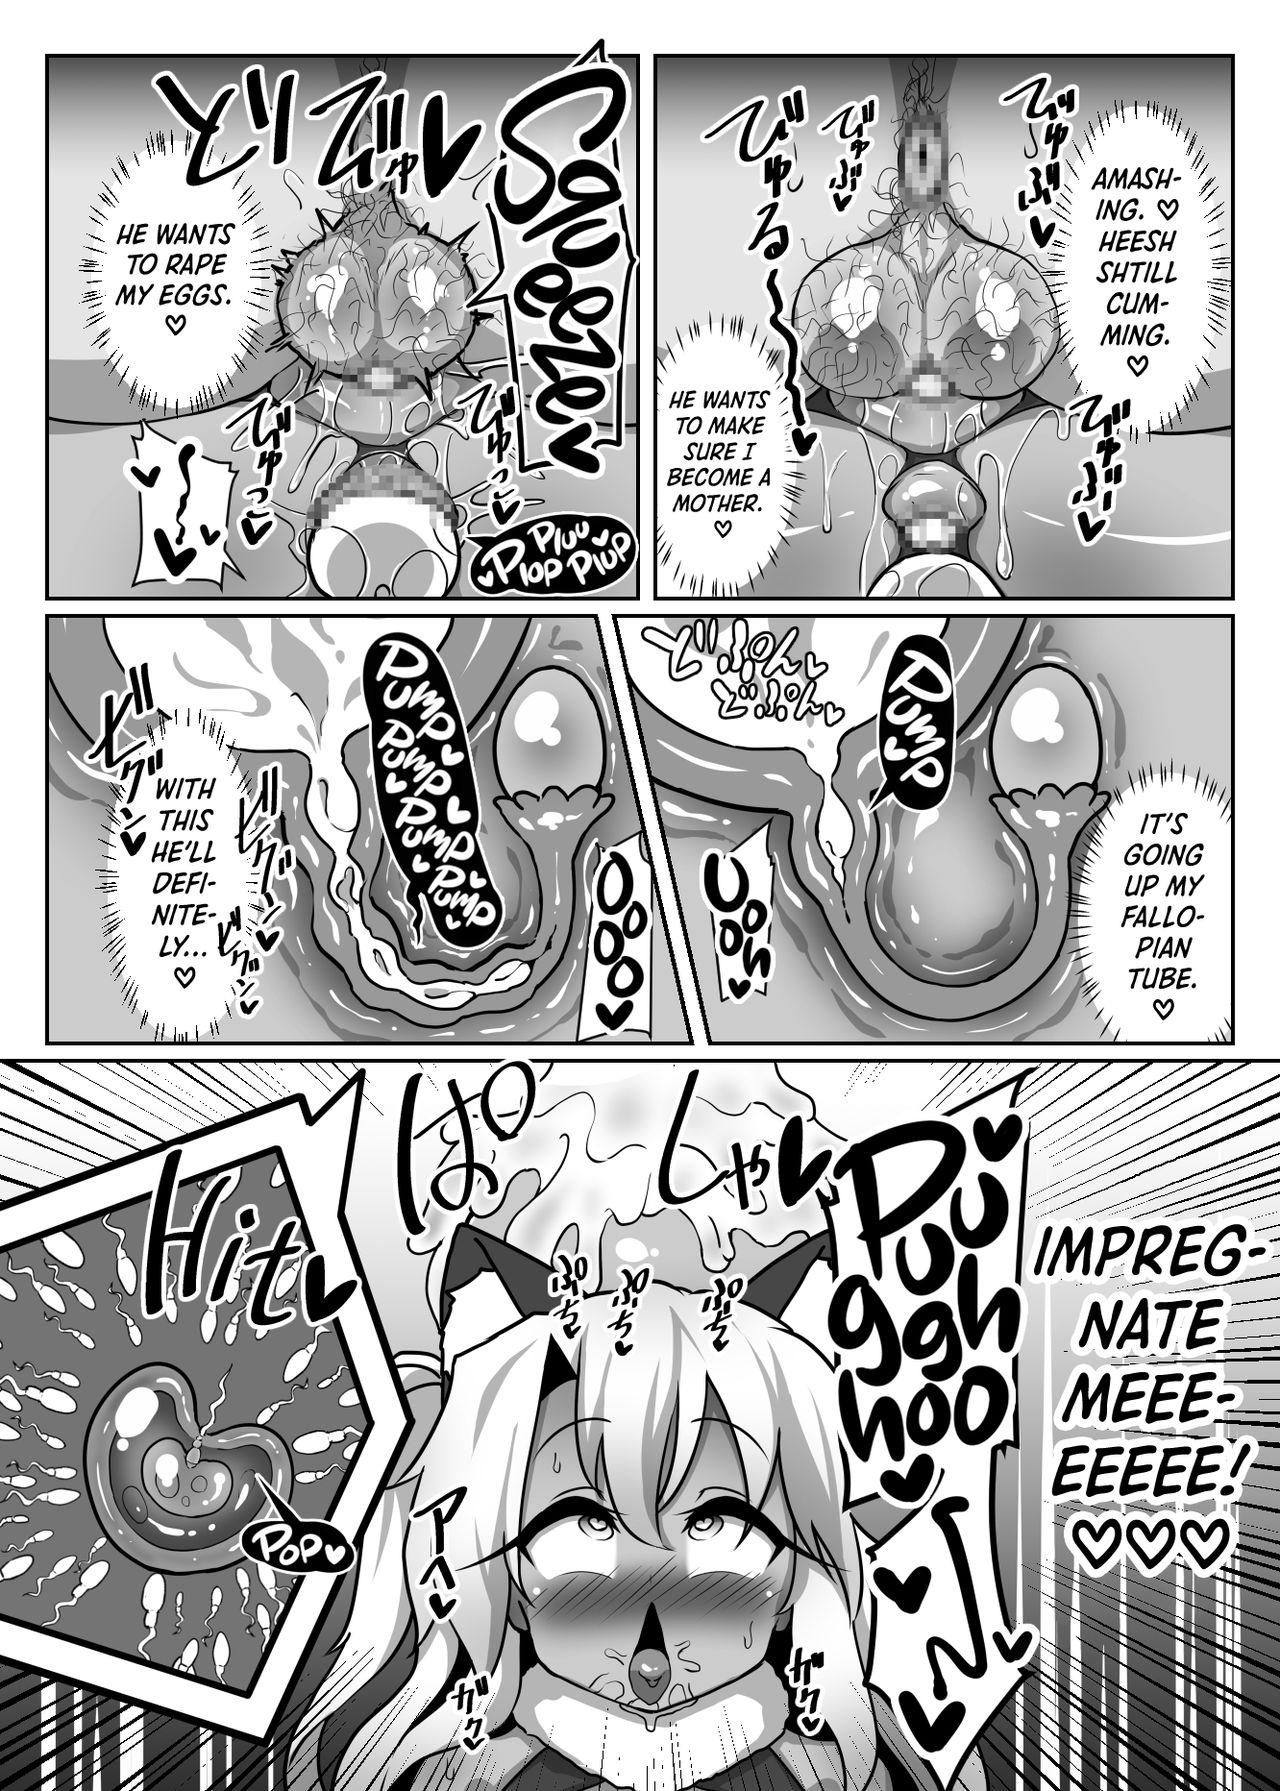 [Kotee] A book where Chloe-chan pretends to be hypnotized and relentlessly gives birth over and over to a disgusting old micro-dicked virgin’s babies. (Fate/kaleid liner Prisma Illya) [English] [Secluded] [Digital] 26